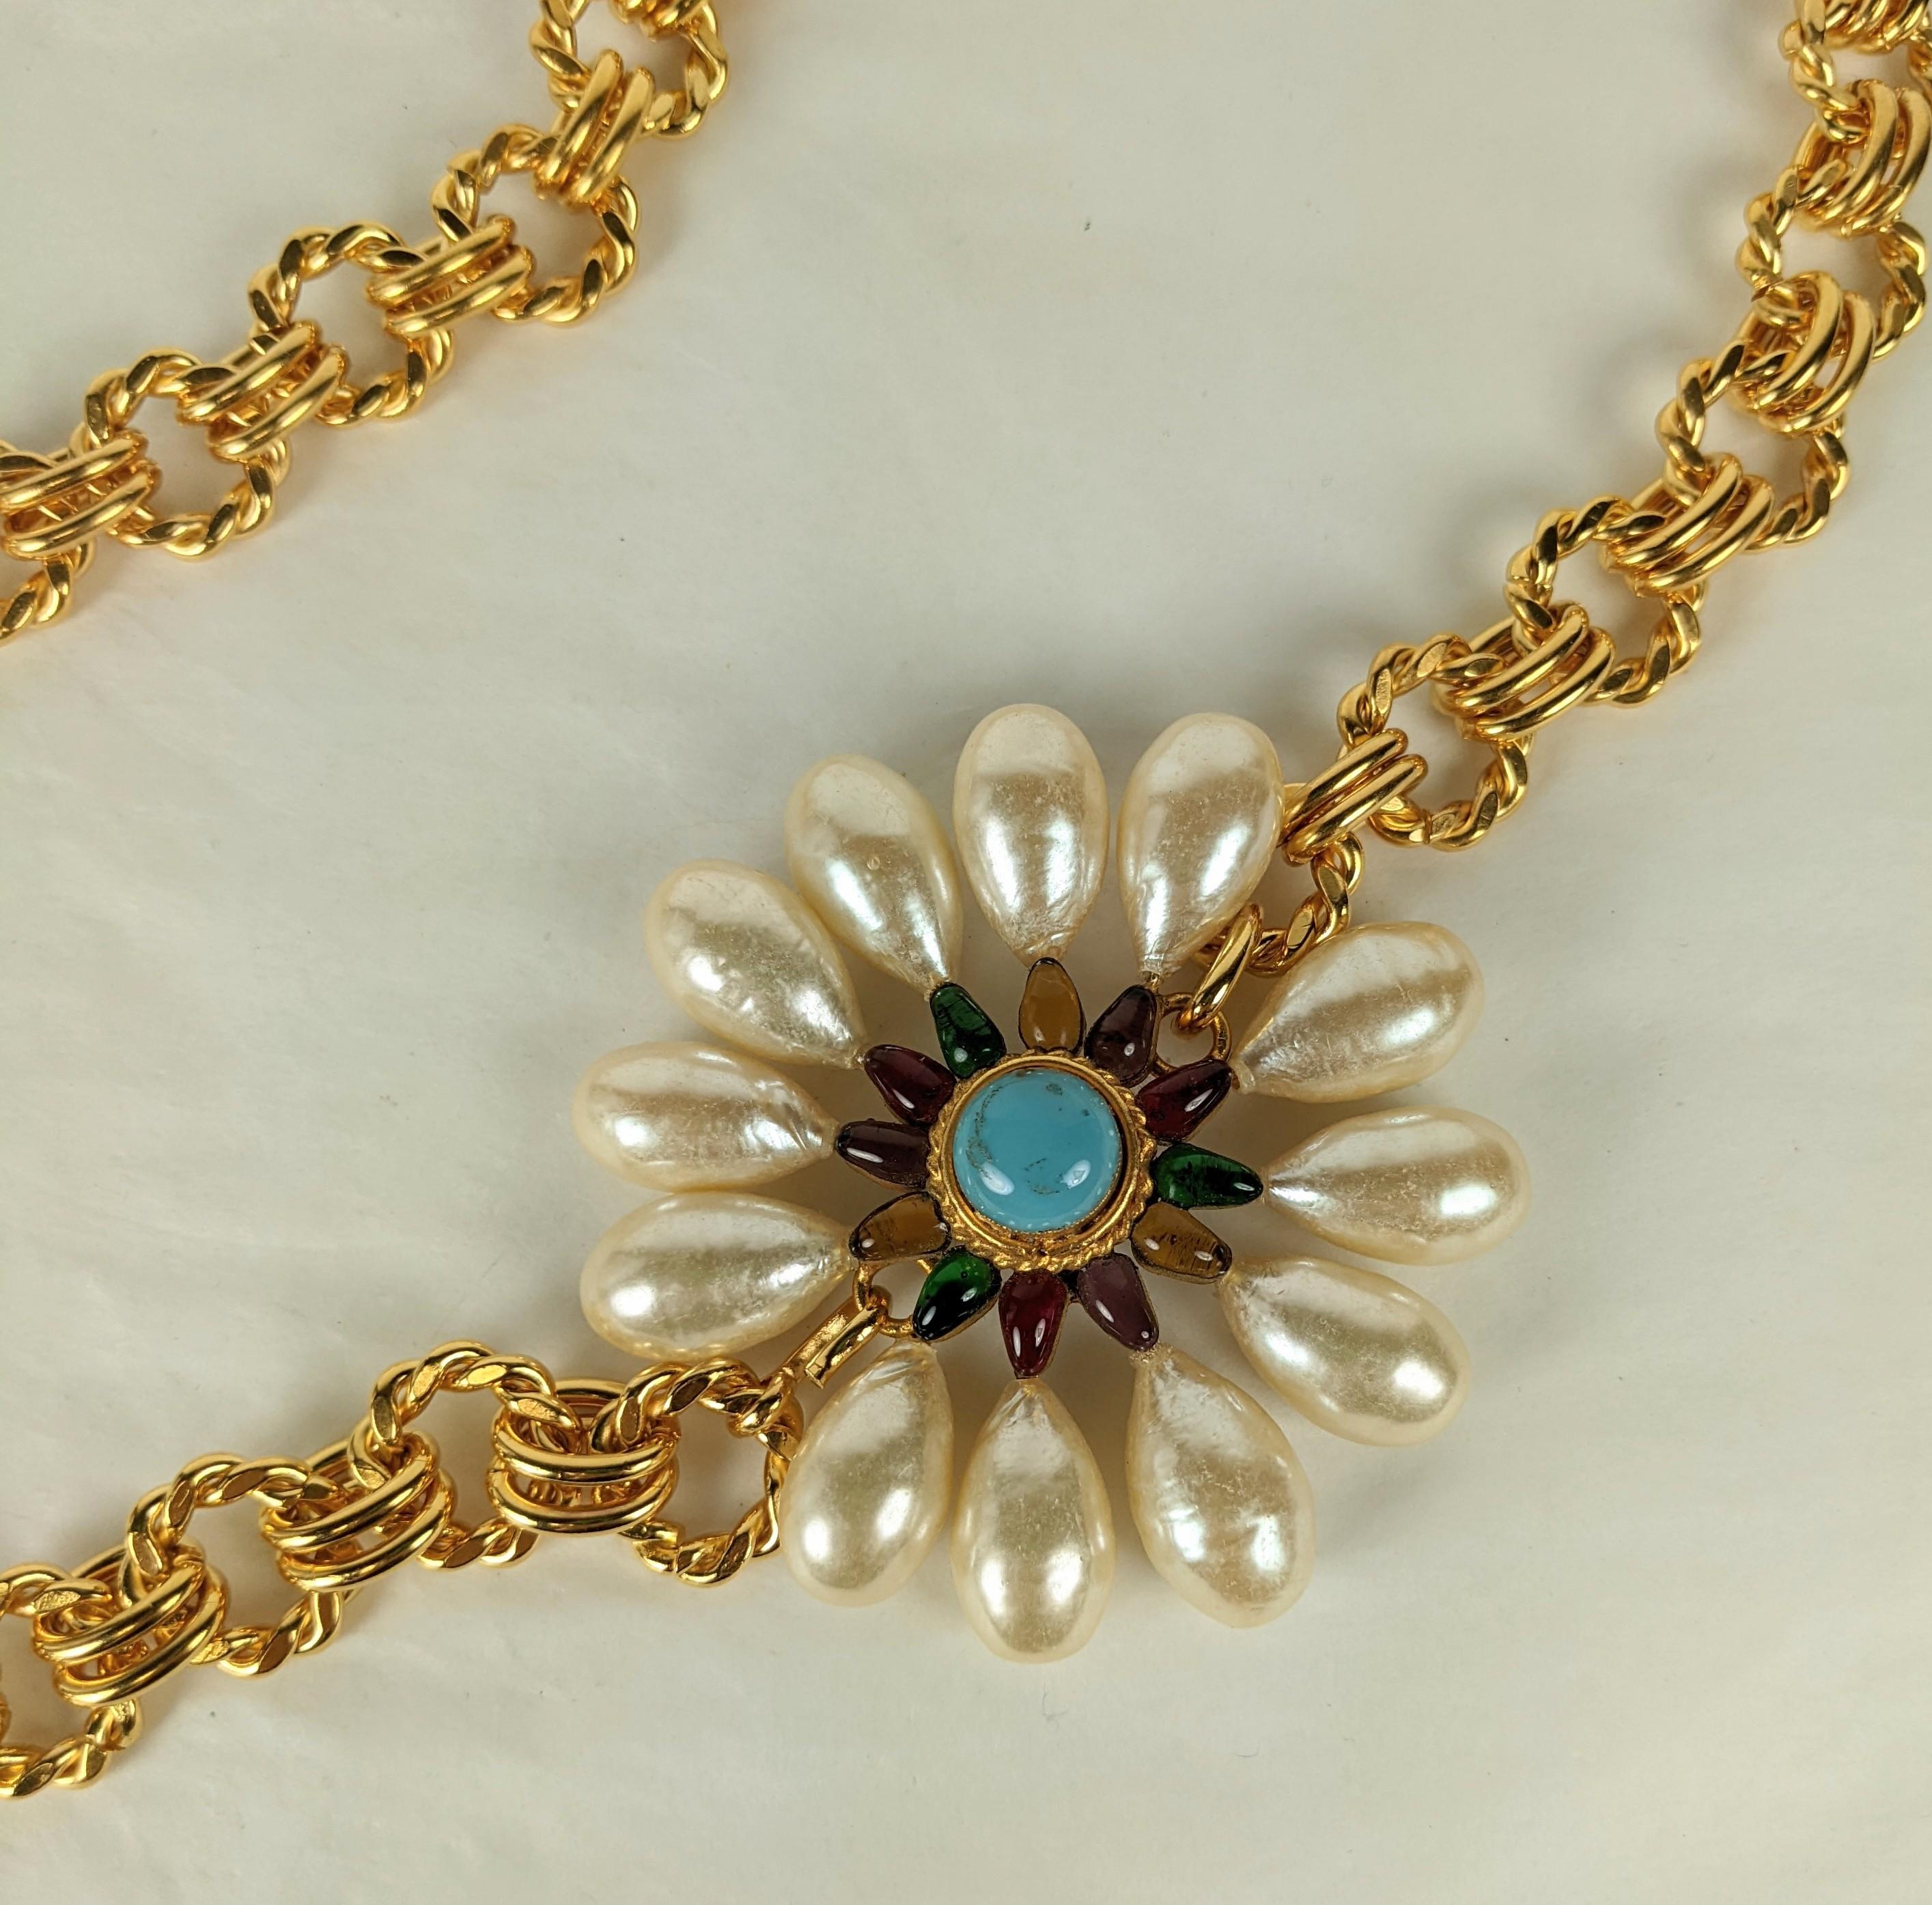 Maison Gripoix for Chanel Baroque Pearl Flowerhead Chain Necklace In Excellent Condition For Sale In New York, NY